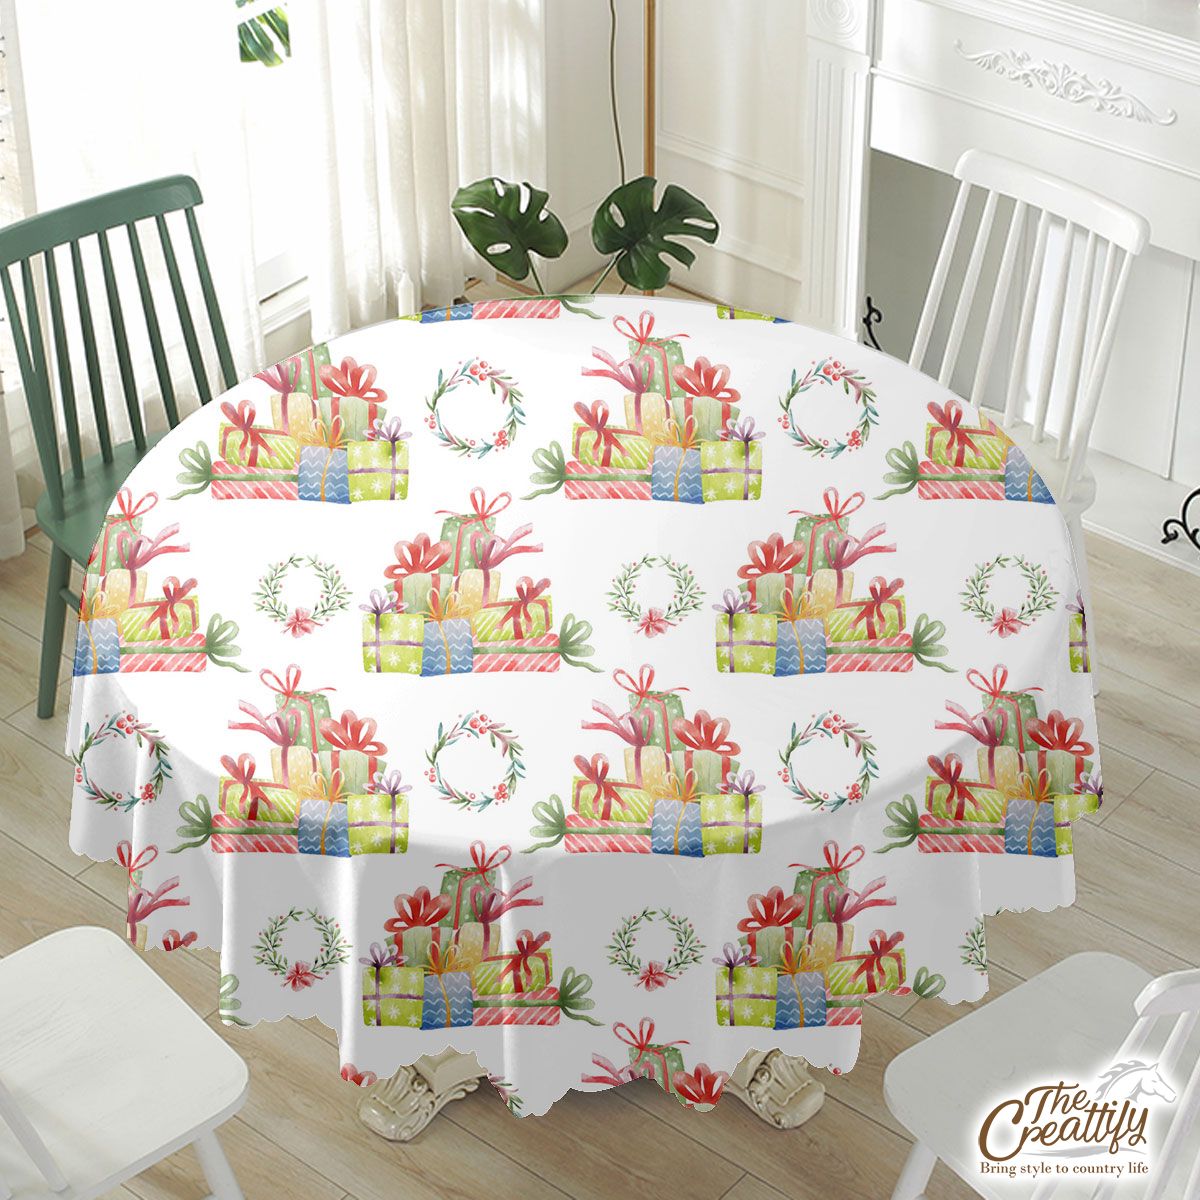 Christmas Gift, Christmas Wreath On White Background Waterproof Tablecloth